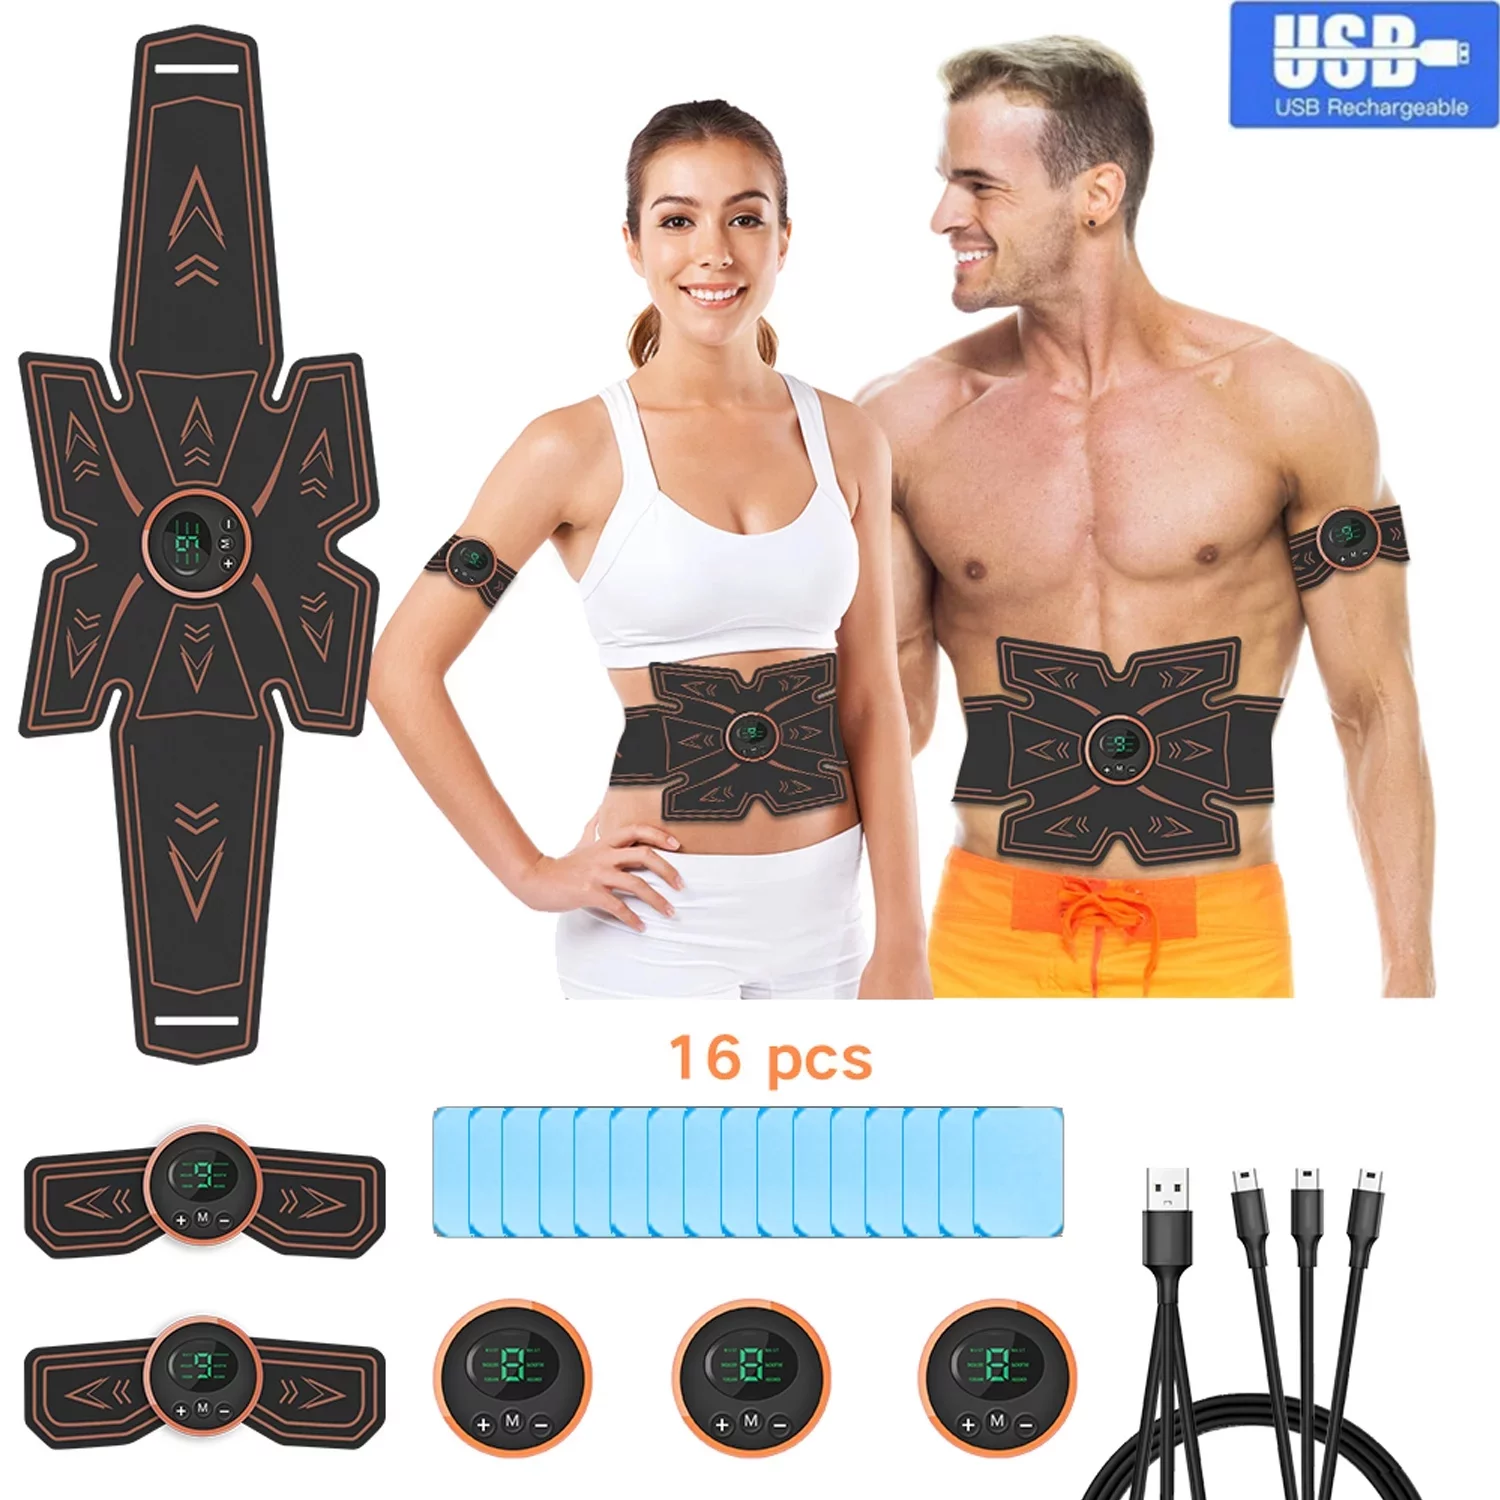 Ifanze Abs Stimulator, Ab Stimulator, Rechargeable Ultimate Muscle Toner Trainer for Men Women Abdominal Fitness Workout EMS Muscle Stimulation with 16 Extra Gel Pads